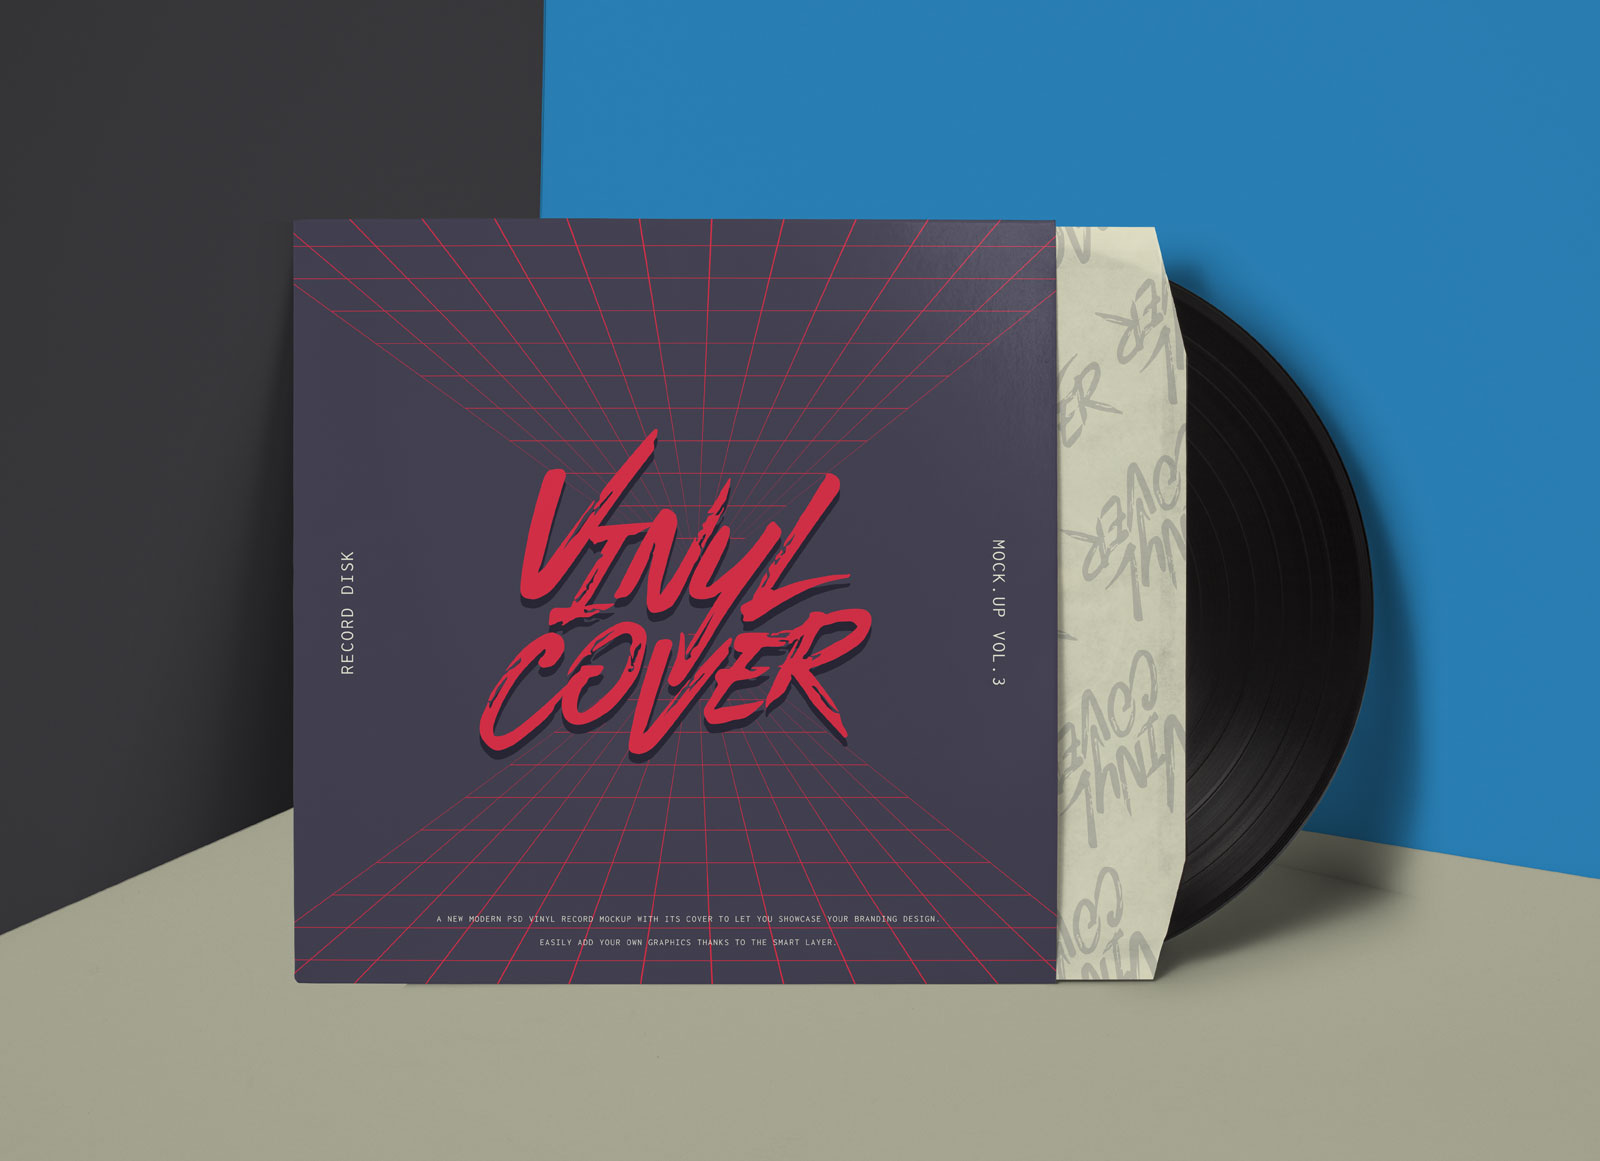 Free-Vinyl-Cover-Record-Packaging-Mockup-PSD